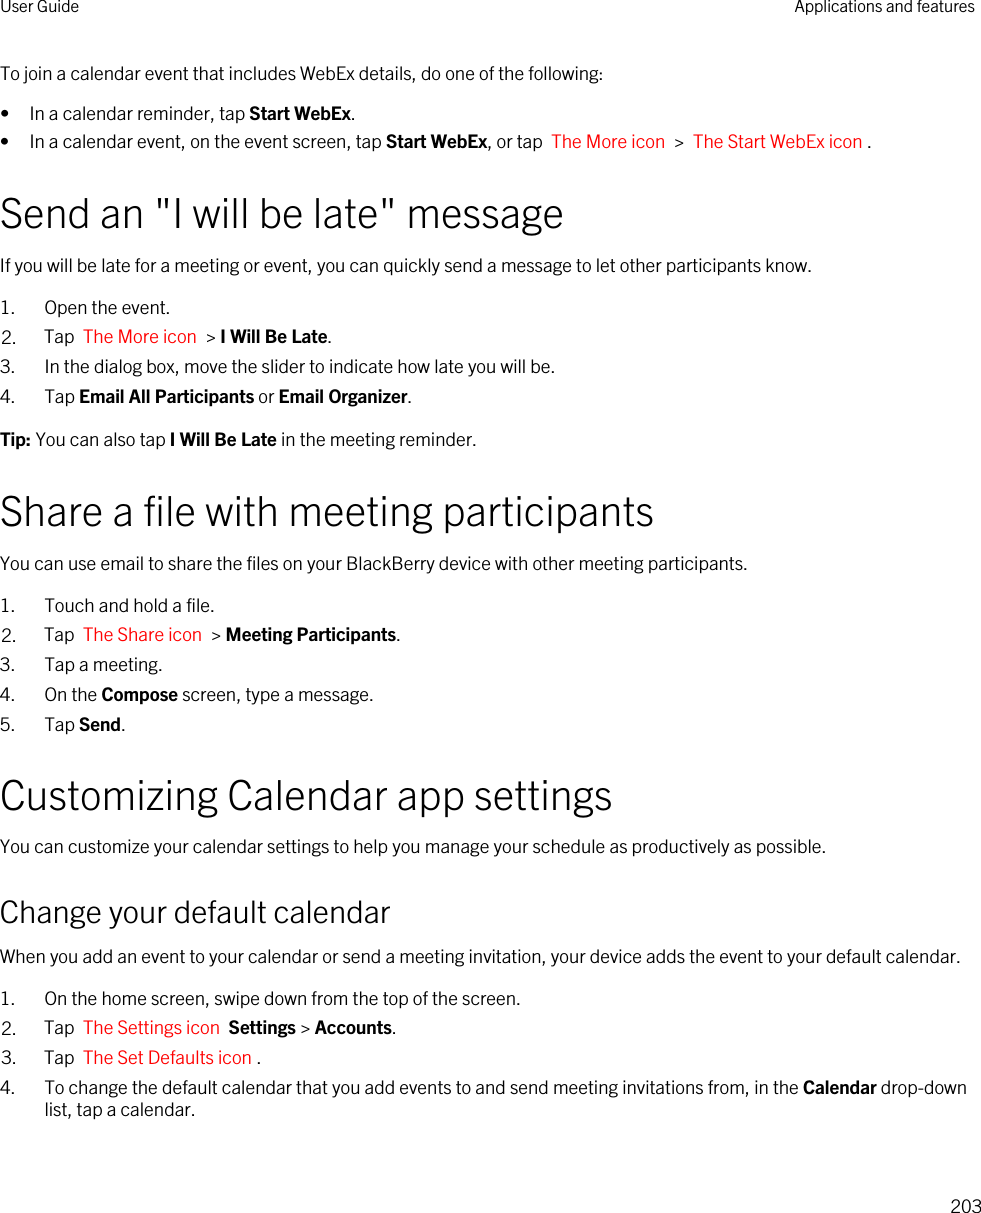 To join a calendar event that includes WebEx details, do one of the following:• In a calendar reminder, tap Start WebEx.• In a calendar event, on the event screen, tap Start WebEx, or tap  The More icon  &gt;  The Start WebEx icon .Send an &quot;I will be late&quot; messageIf you will be late for a meeting or event, you can quickly send a message to let other participants know.1. Open the event.2. Tap  The More icon  &gt; I Will Be Late.3. In the dialog box, move the slider to indicate how late you will be.4. Tap Email All Participants or Email Organizer.Tip: You can also tap I Will Be Late in the meeting reminder.Share a file with meeting participantsYou can use email to share the files on your BlackBerry device with other meeting participants.1. Touch and hold a file.2. Tap  The Share icon  &gt; Meeting Participants.3. Tap a meeting.4. On the Compose screen, type a message.5. Tap Send.Customizing Calendar app settingsYou can customize your calendar settings to help you manage your schedule as productively as possible.Change your default calendarWhen you add an event to your calendar or send a meeting invitation, your device adds the event to your default calendar.1. On the home screen, swipe down from the top of the screen.2. Tap  The Settings icon  Settings &gt; Accounts.3. Tap  The Set Defaults icon .4. To change the default calendar that you add events to and send meeting invitations from, in the Calendar drop-down list, tap a calendar.User Guide Applications and features203